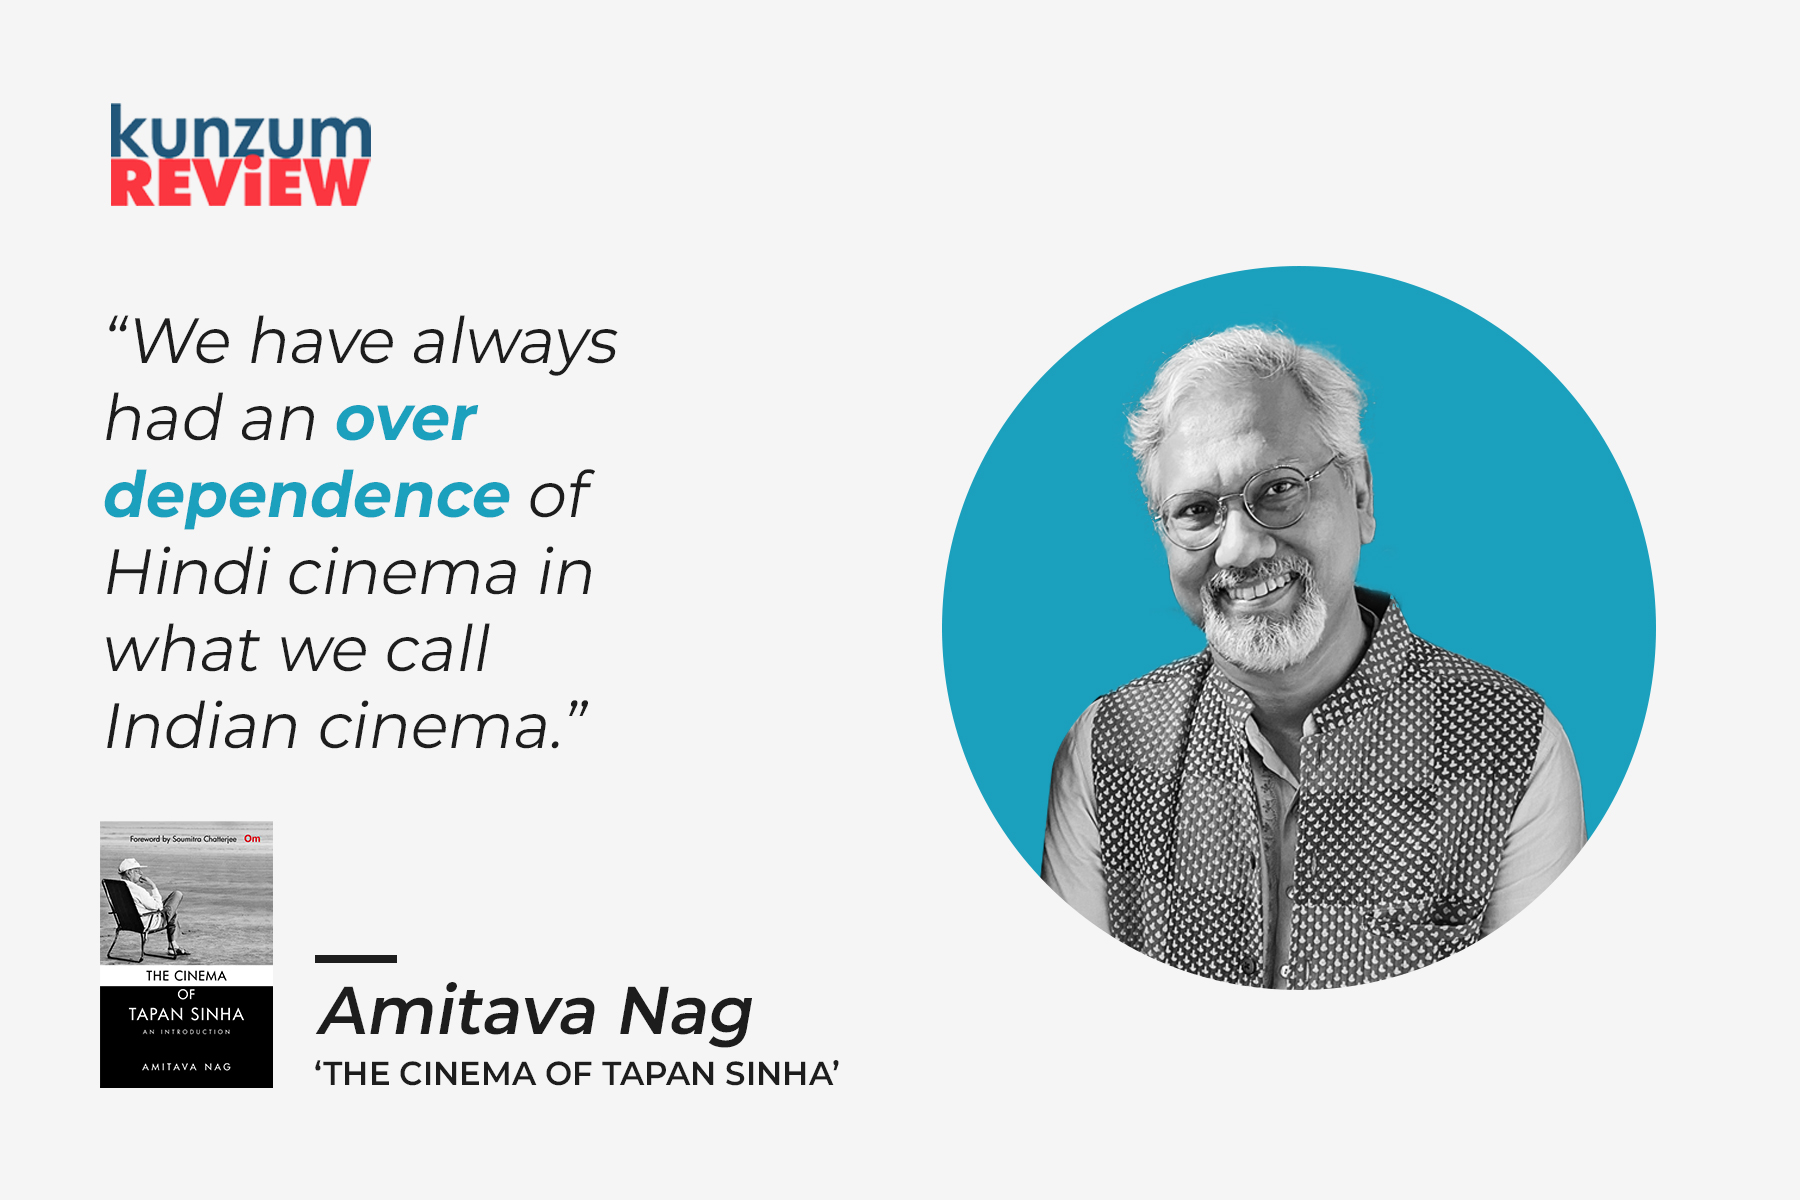 Author Interview: We Have Always Had an Over-Dependence on Hindi Cinema in What We Call Indian Cinema, Says Amitava Nag